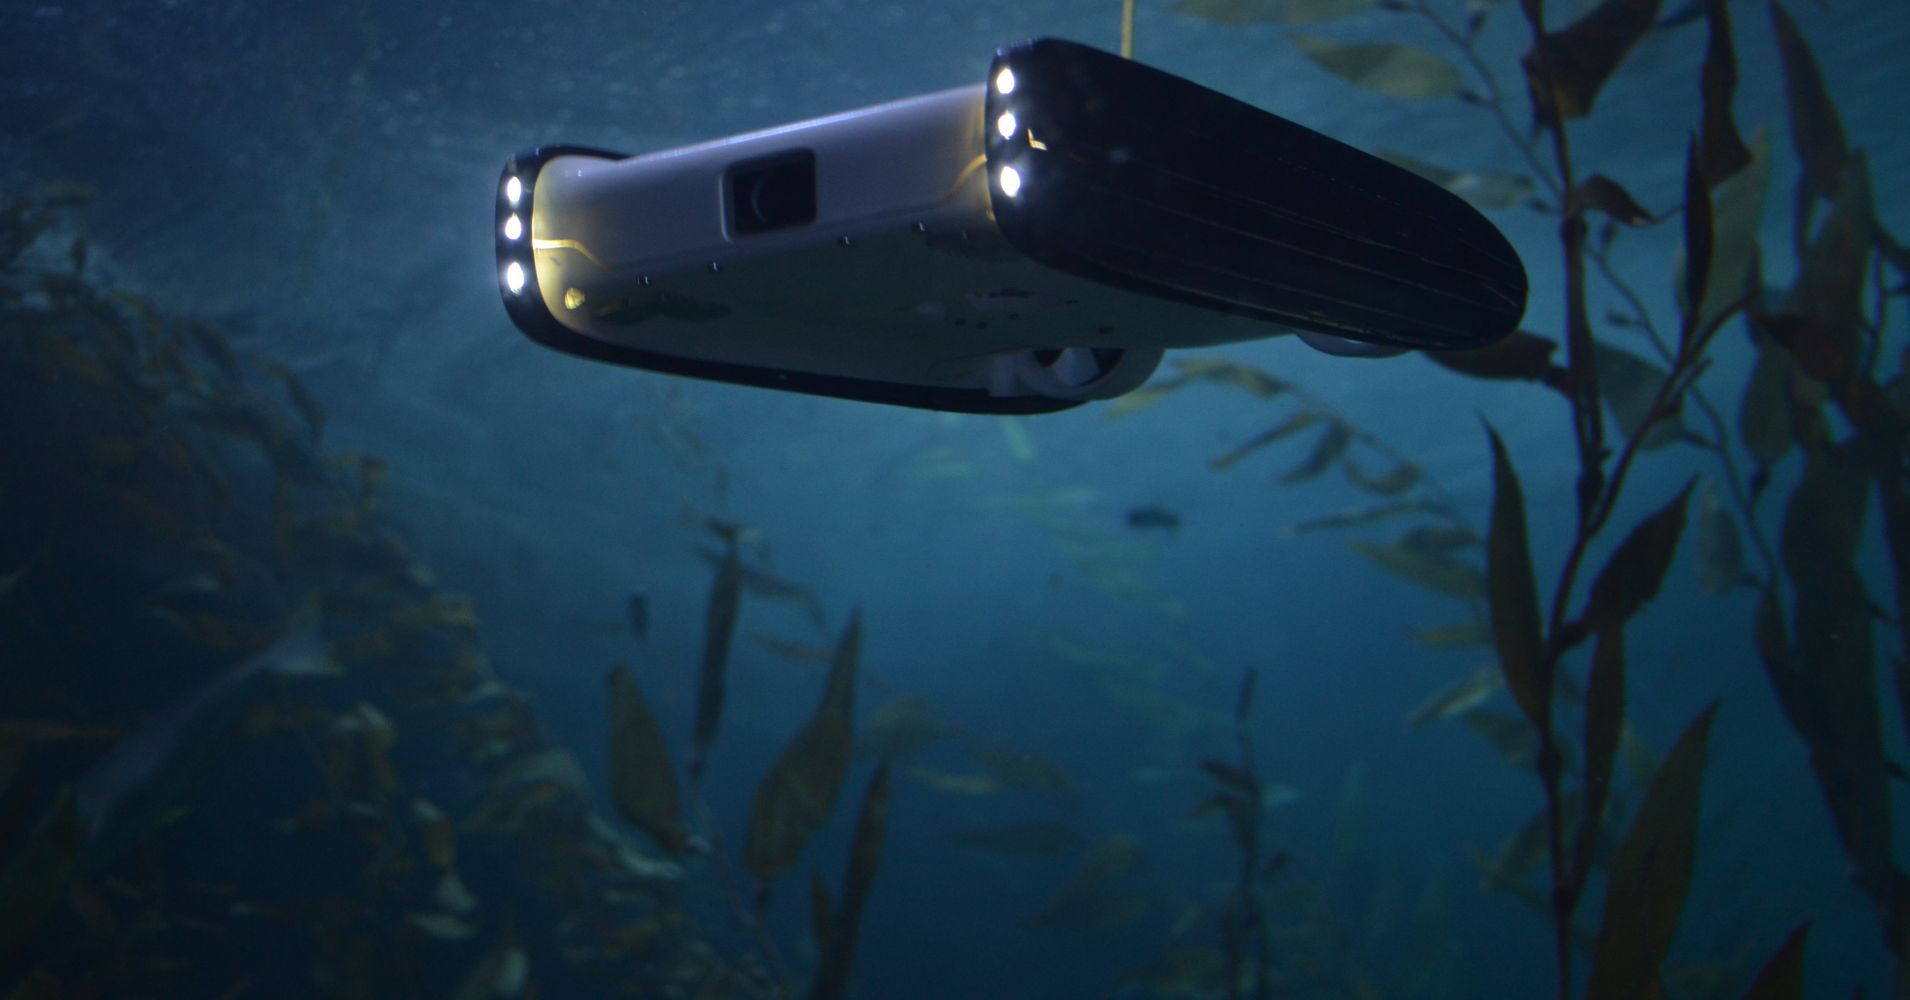 This Underwater Drone Could Let You Explore The Ocean | HuffPost